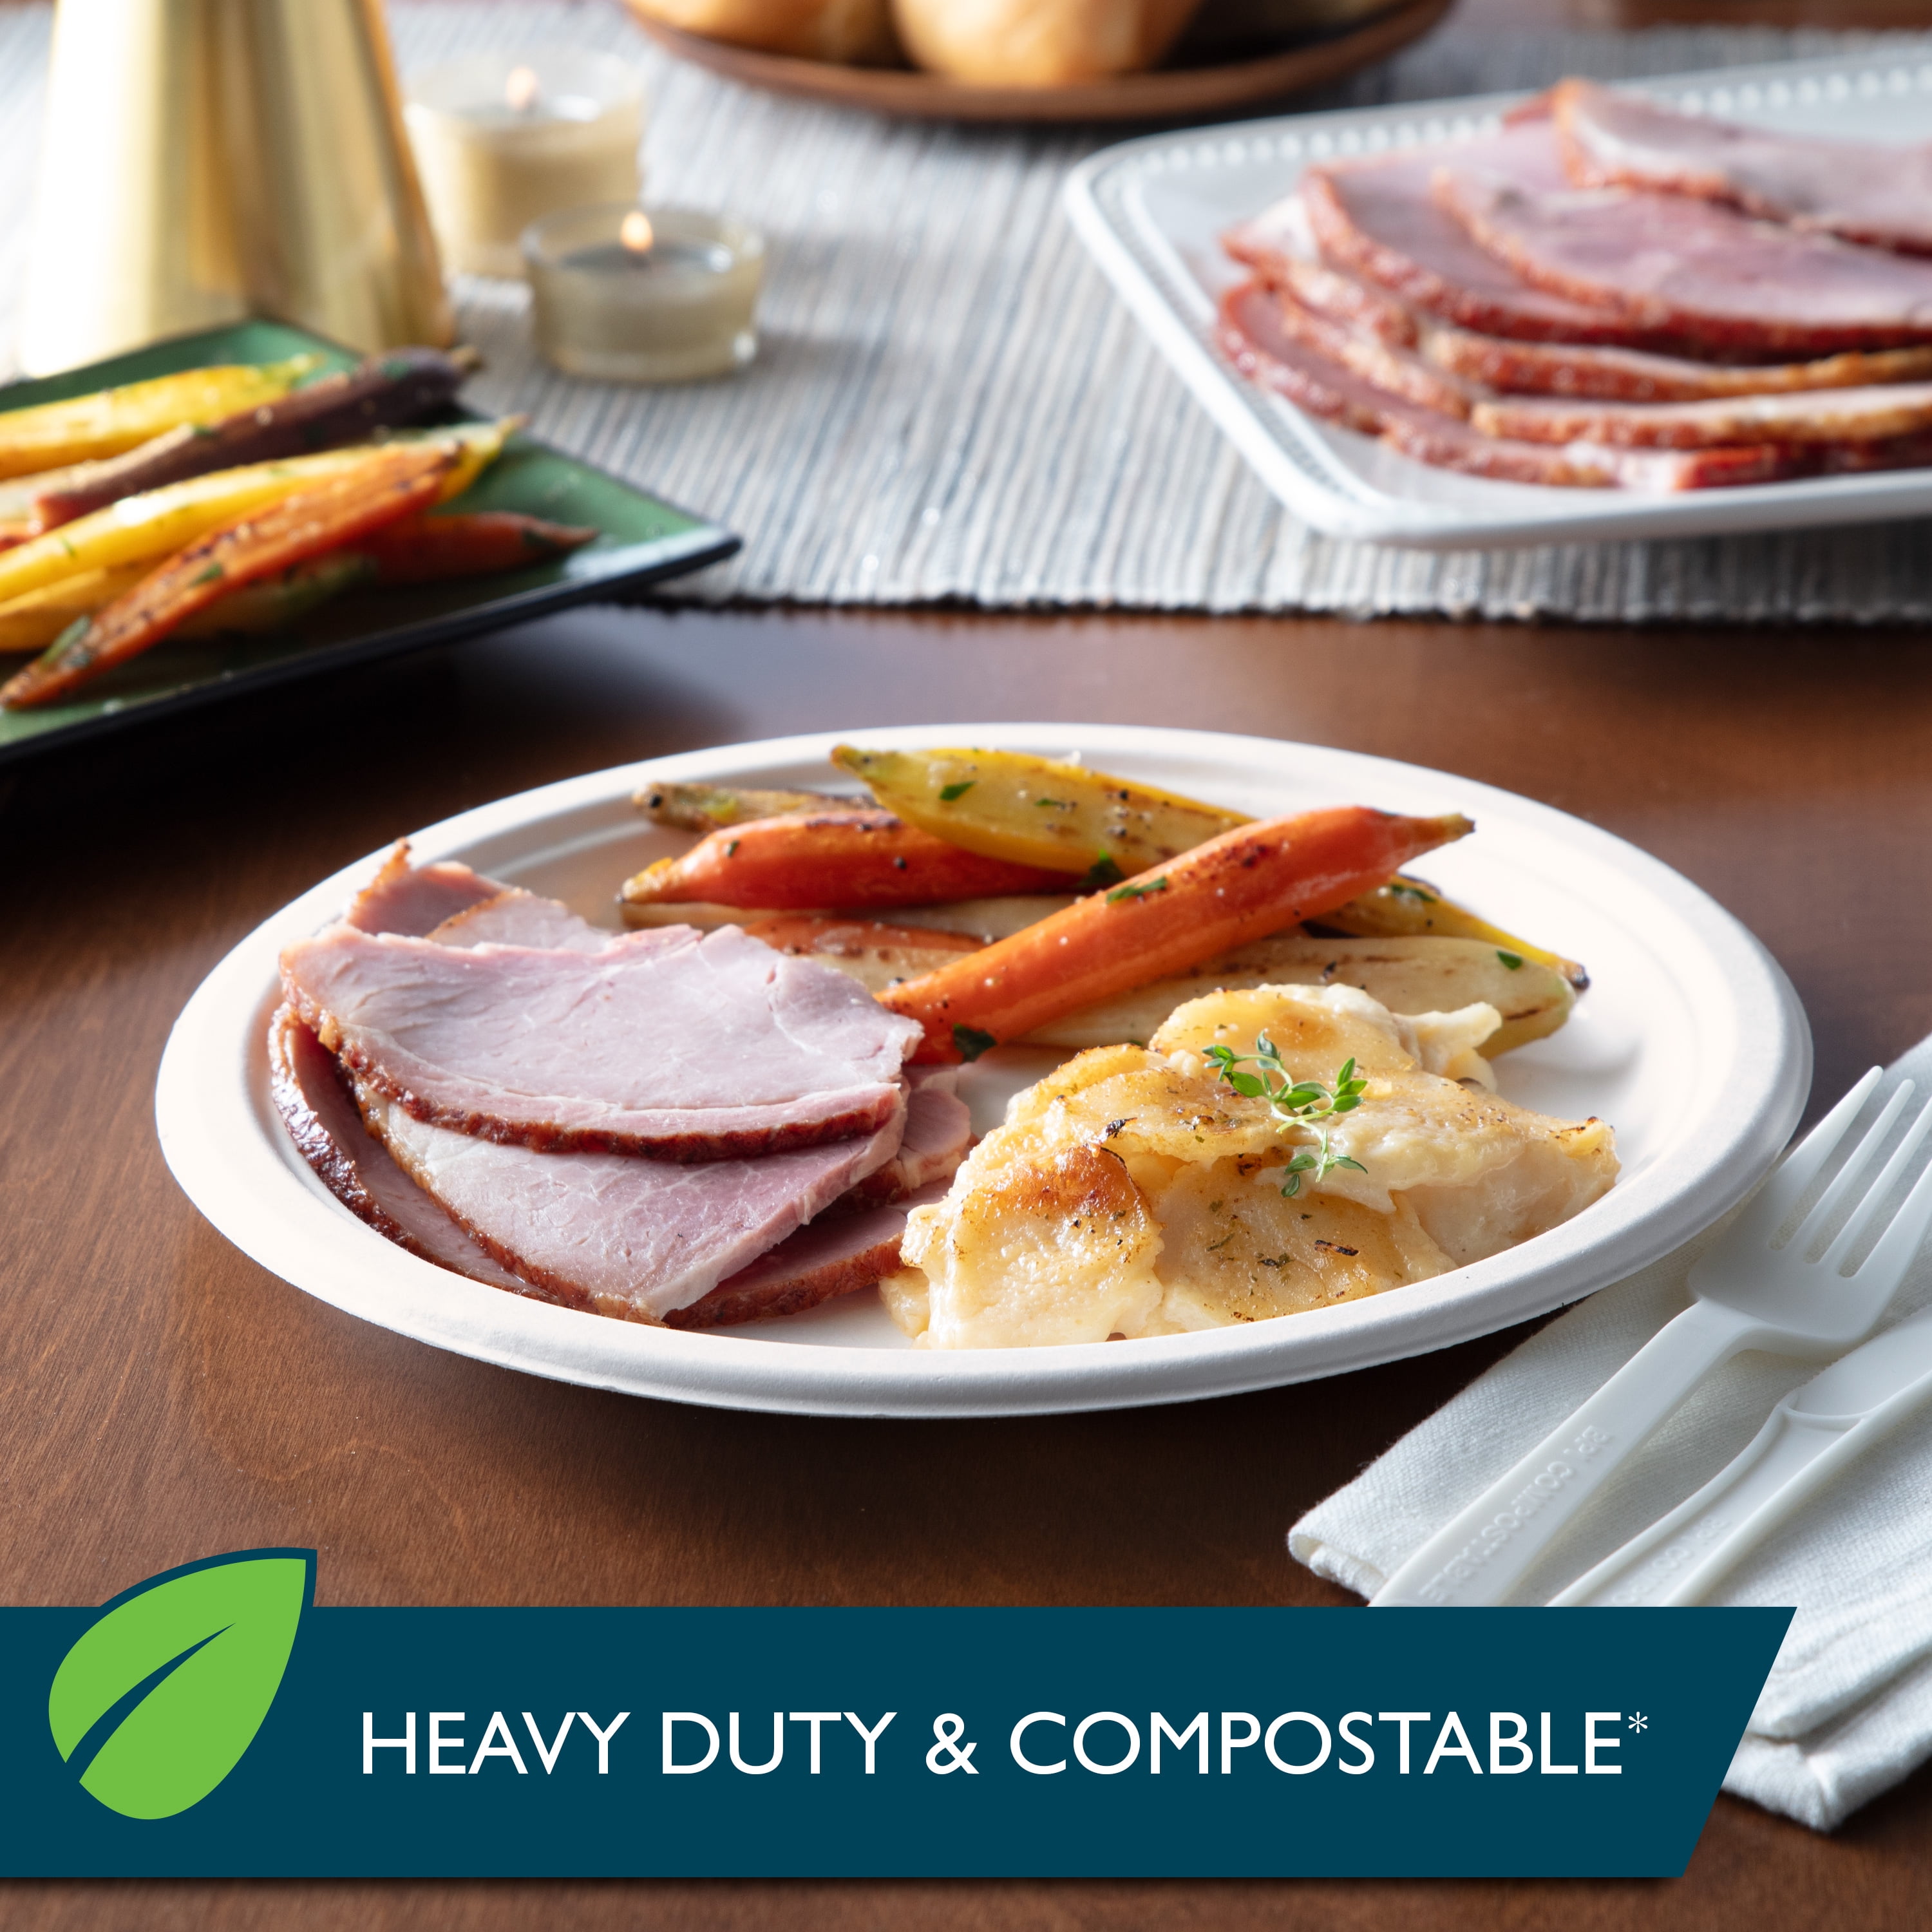 Hefty Compostable Printed Paper Plates, 8.6, 20 Count